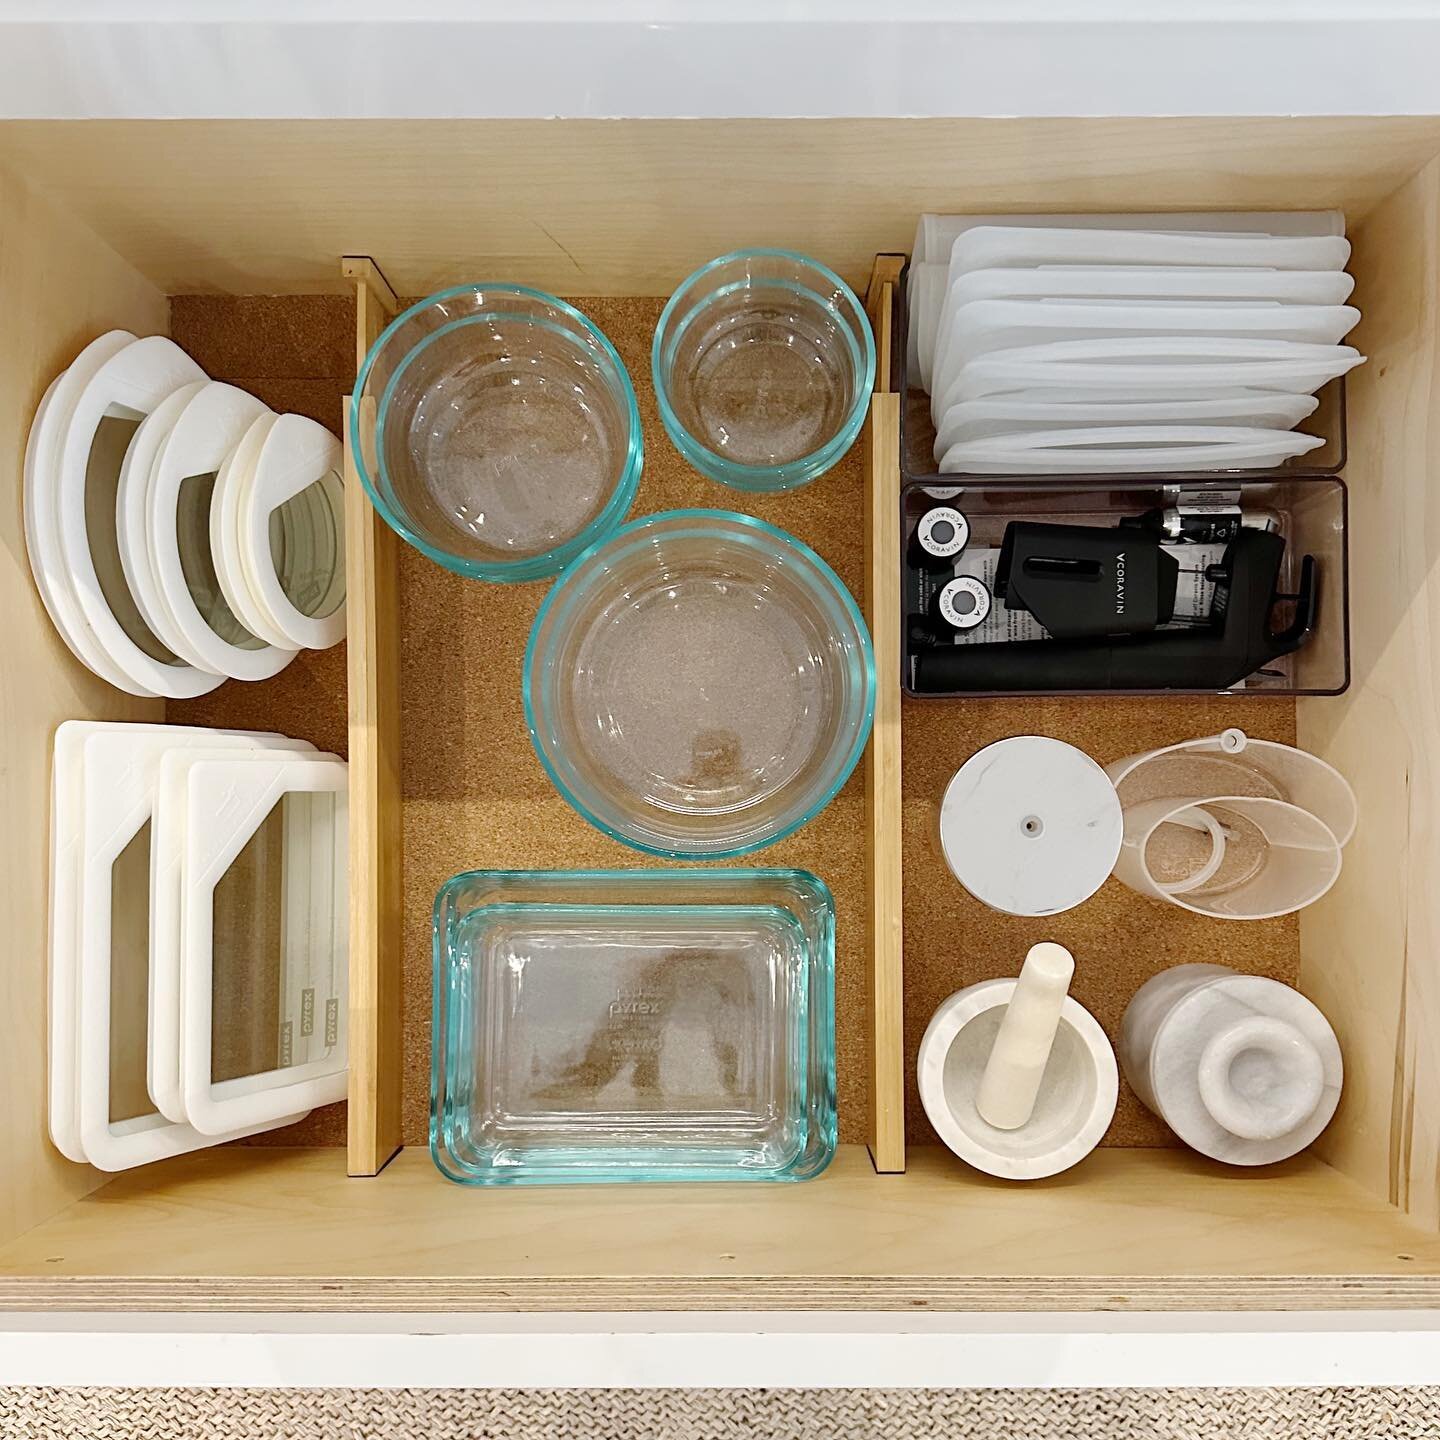 Drawer dividers are the most versatile organizing product available. We also added cork liner so glass containers don't slide.

Both linked in bio - amazon storefront!

#pyrex #pyrexlove #kitchenorganizationideas #stasherbag #coravin #jura #organized